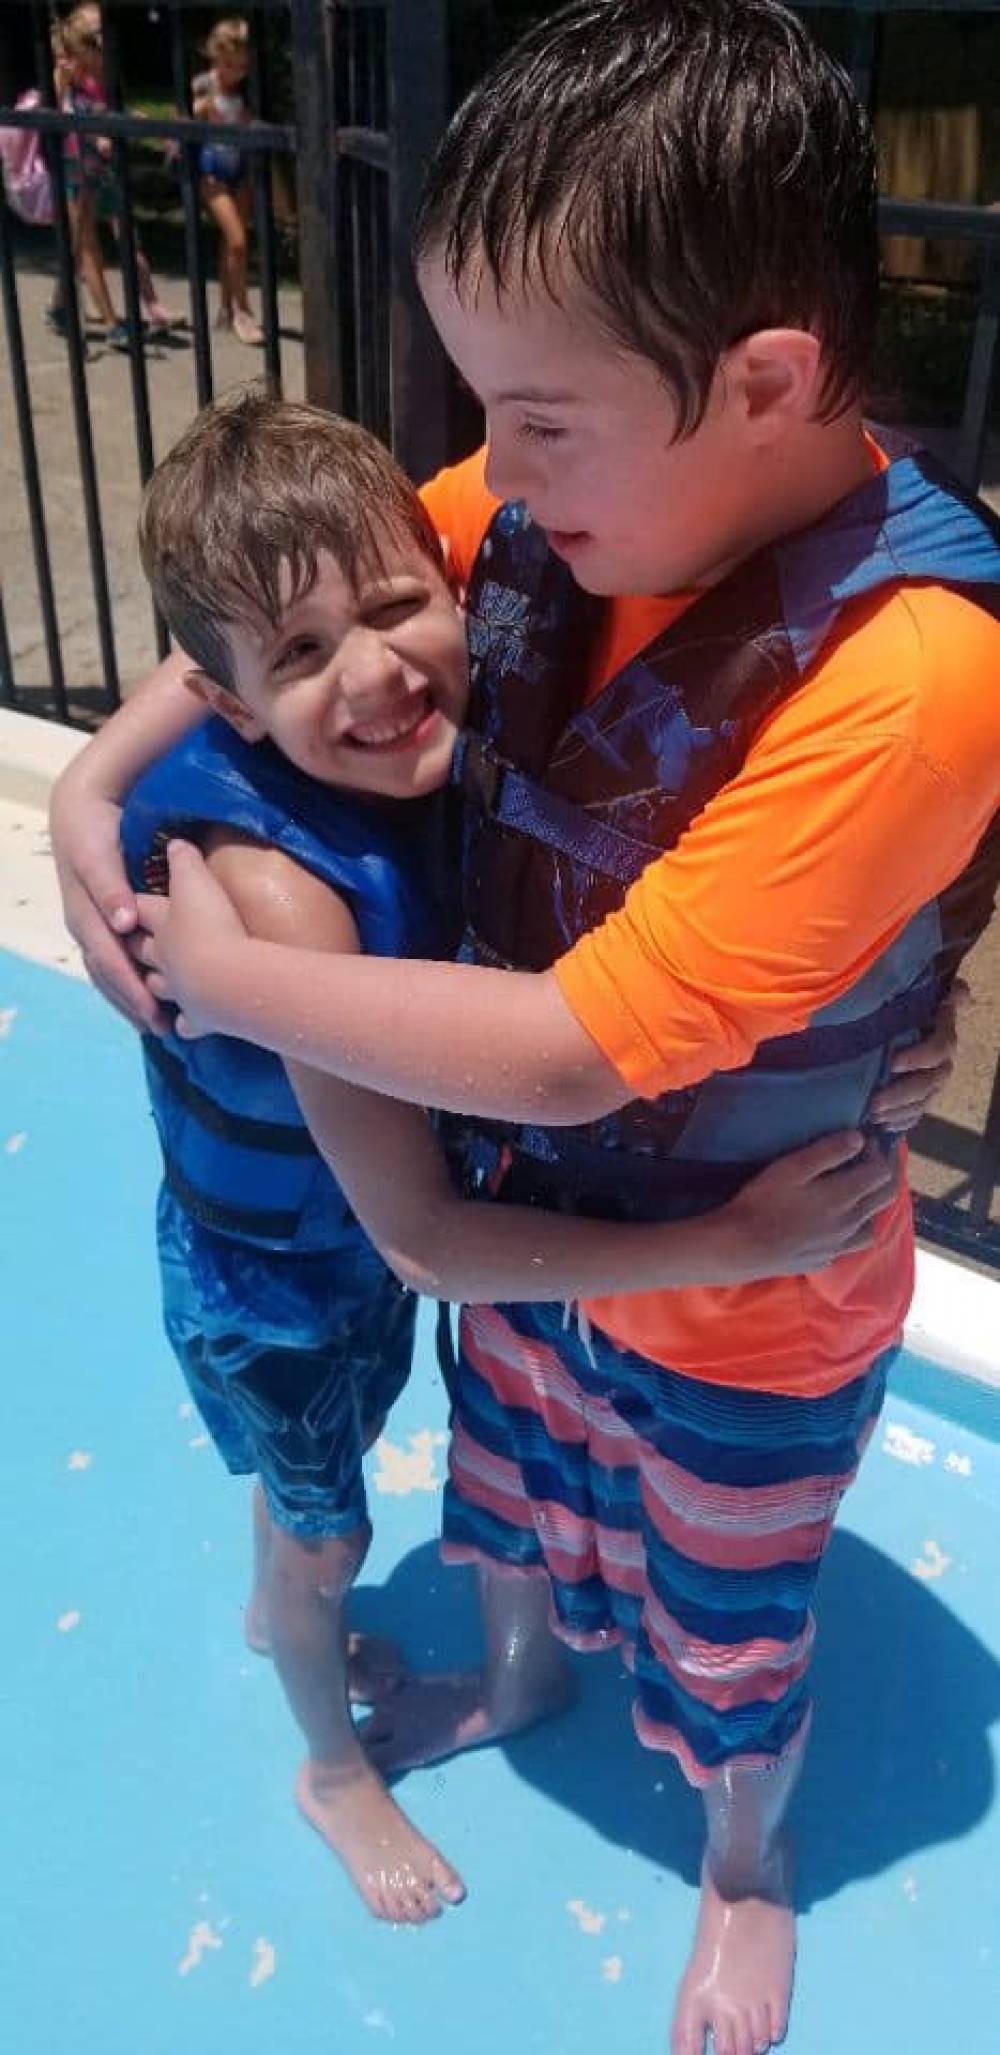 TOP TENNESSEE AQUATICS CAMP: Easter Seals Tennessee is a Top Aquatics Summer Camp located in Nashville Tennessee offering many fun and enriching Aquatics and other camp programs. 